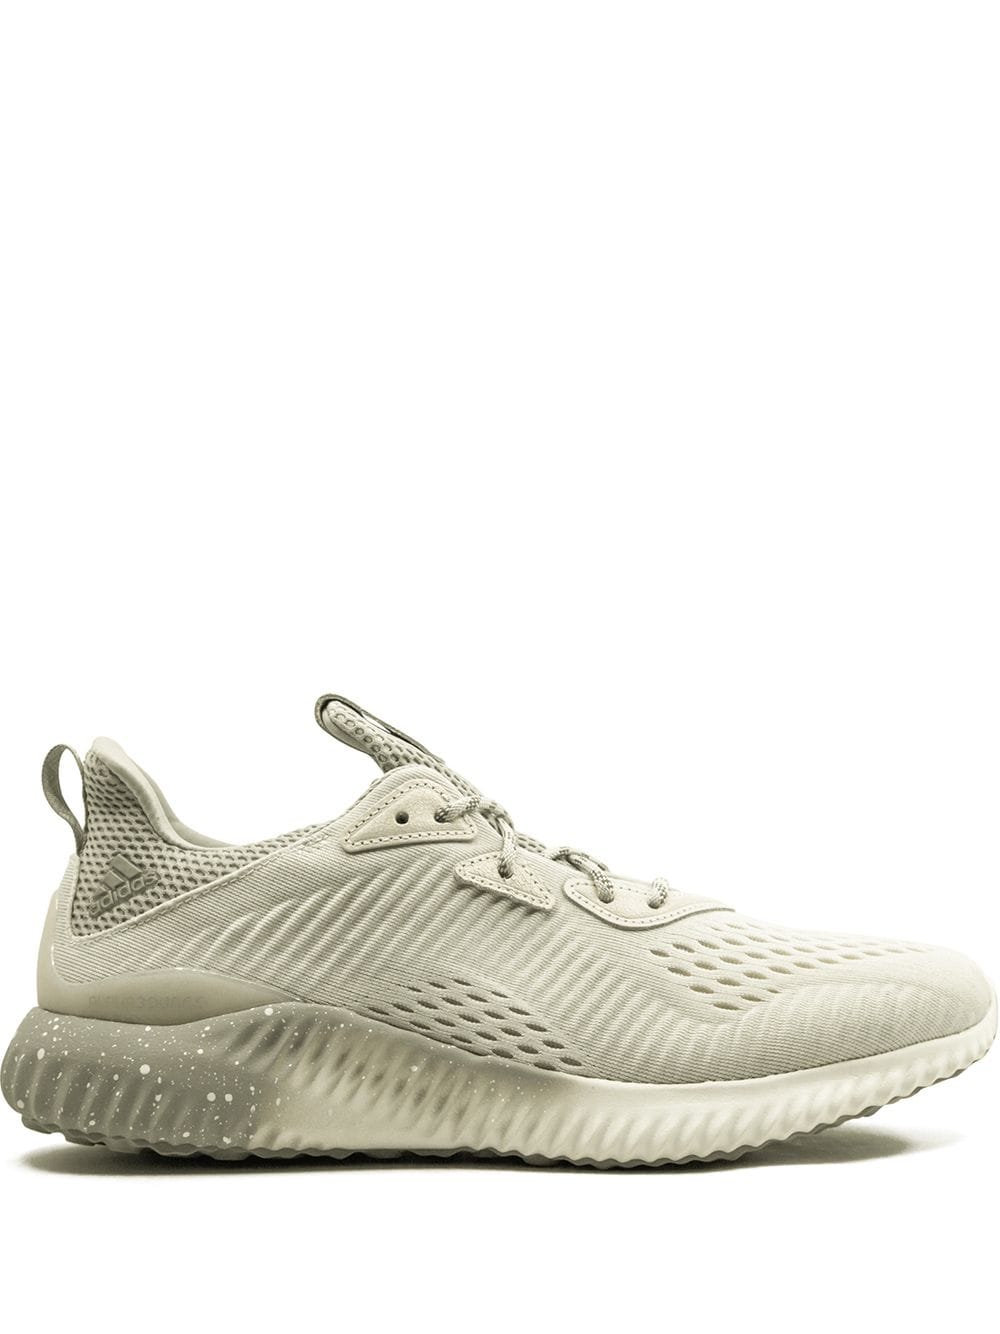 alphabounce 1 reigning champ